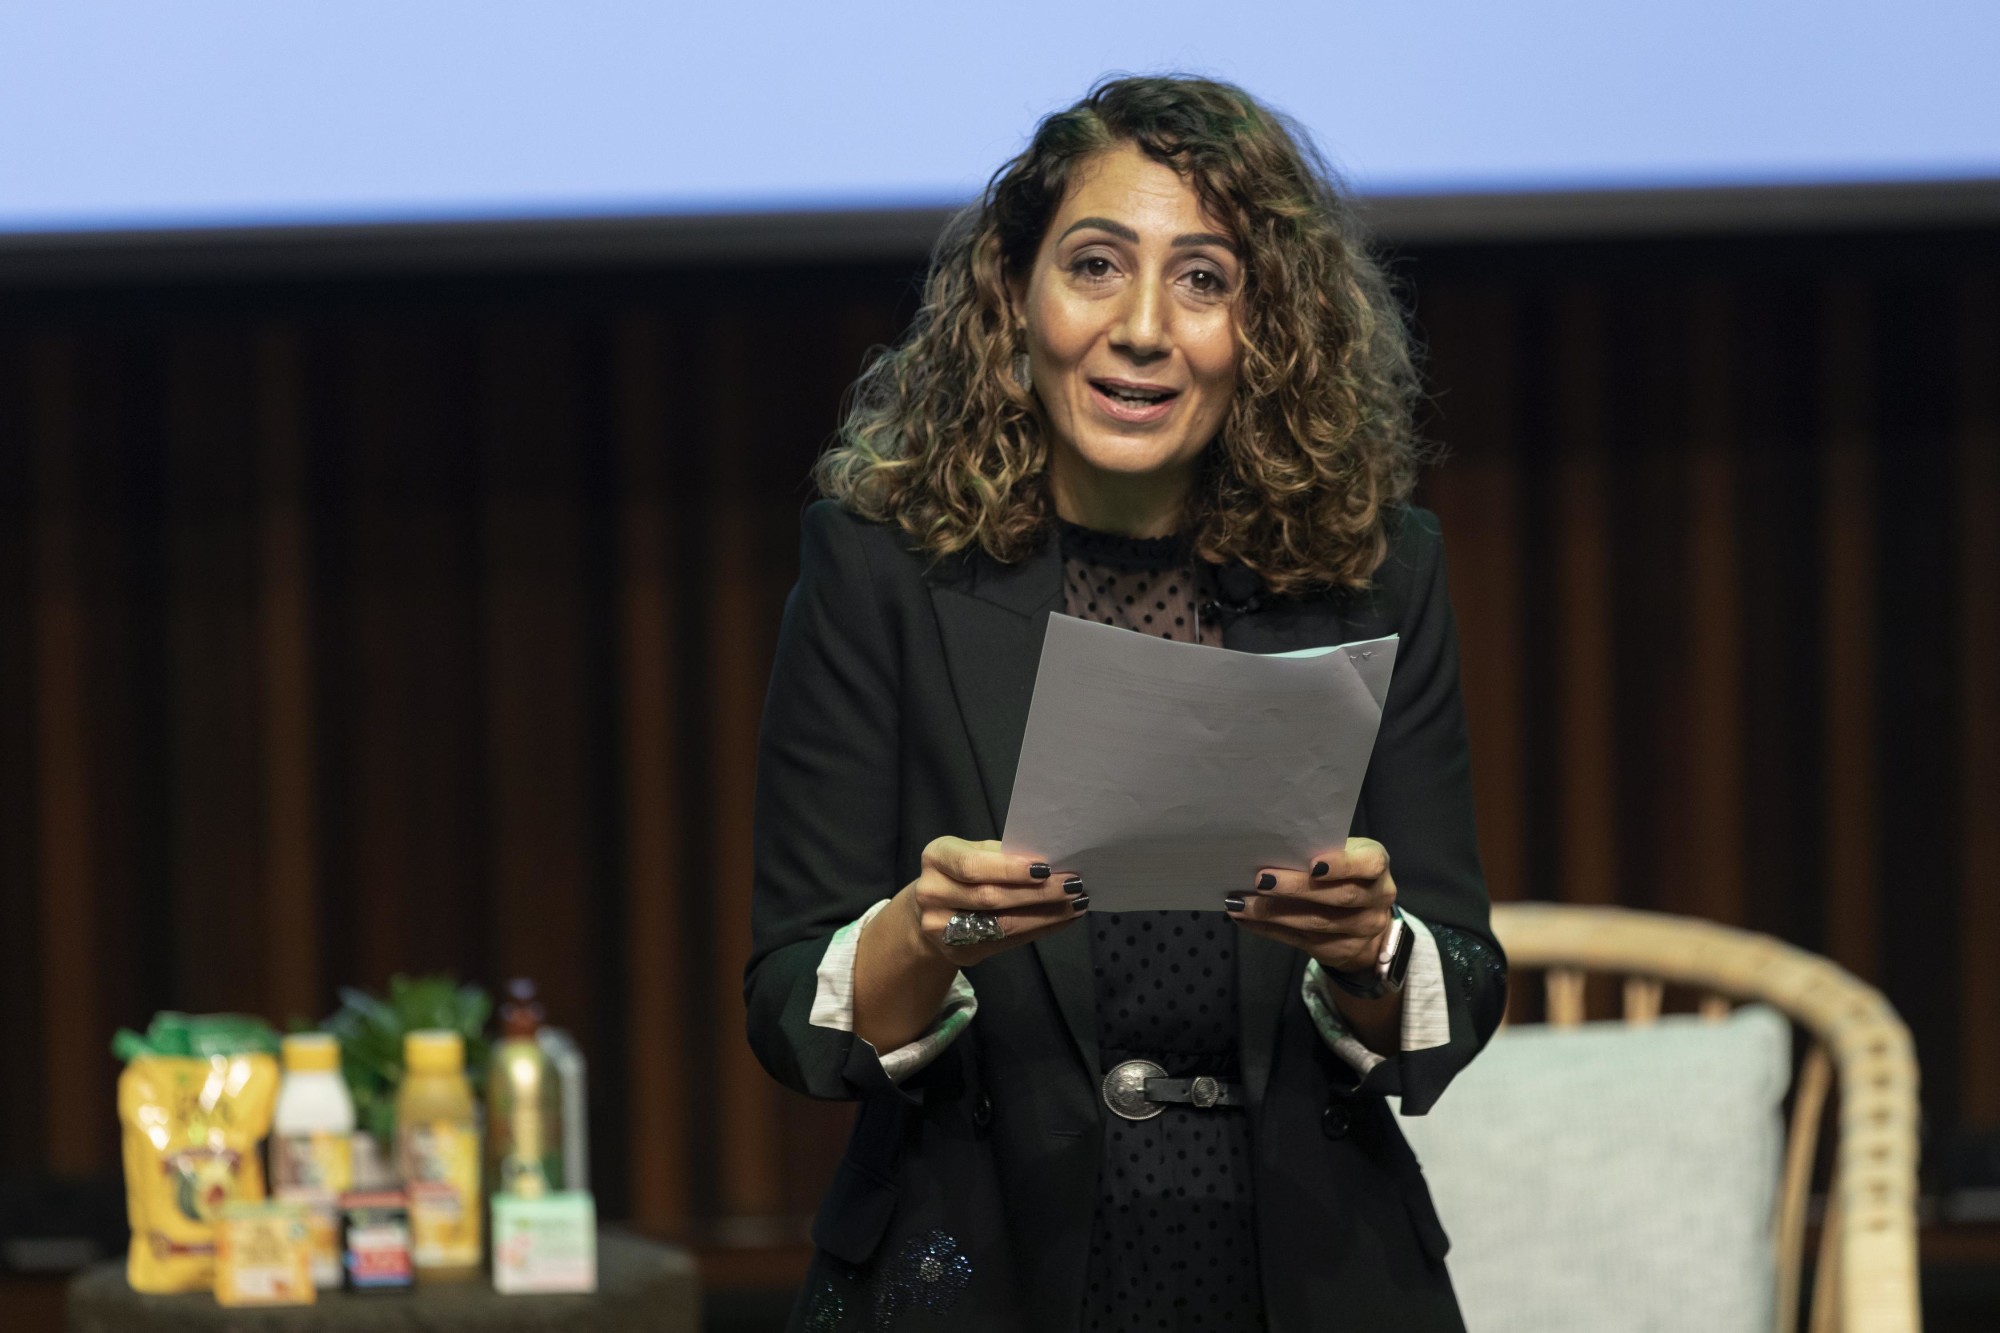 Mariam Farag, Brand Humanity, media & communications strategist, CEO & Founder of Humanizing Brands speaks during the L’Oreal x Garnier “Can Beauty Go Green” event at the Terra Auditorium m35214